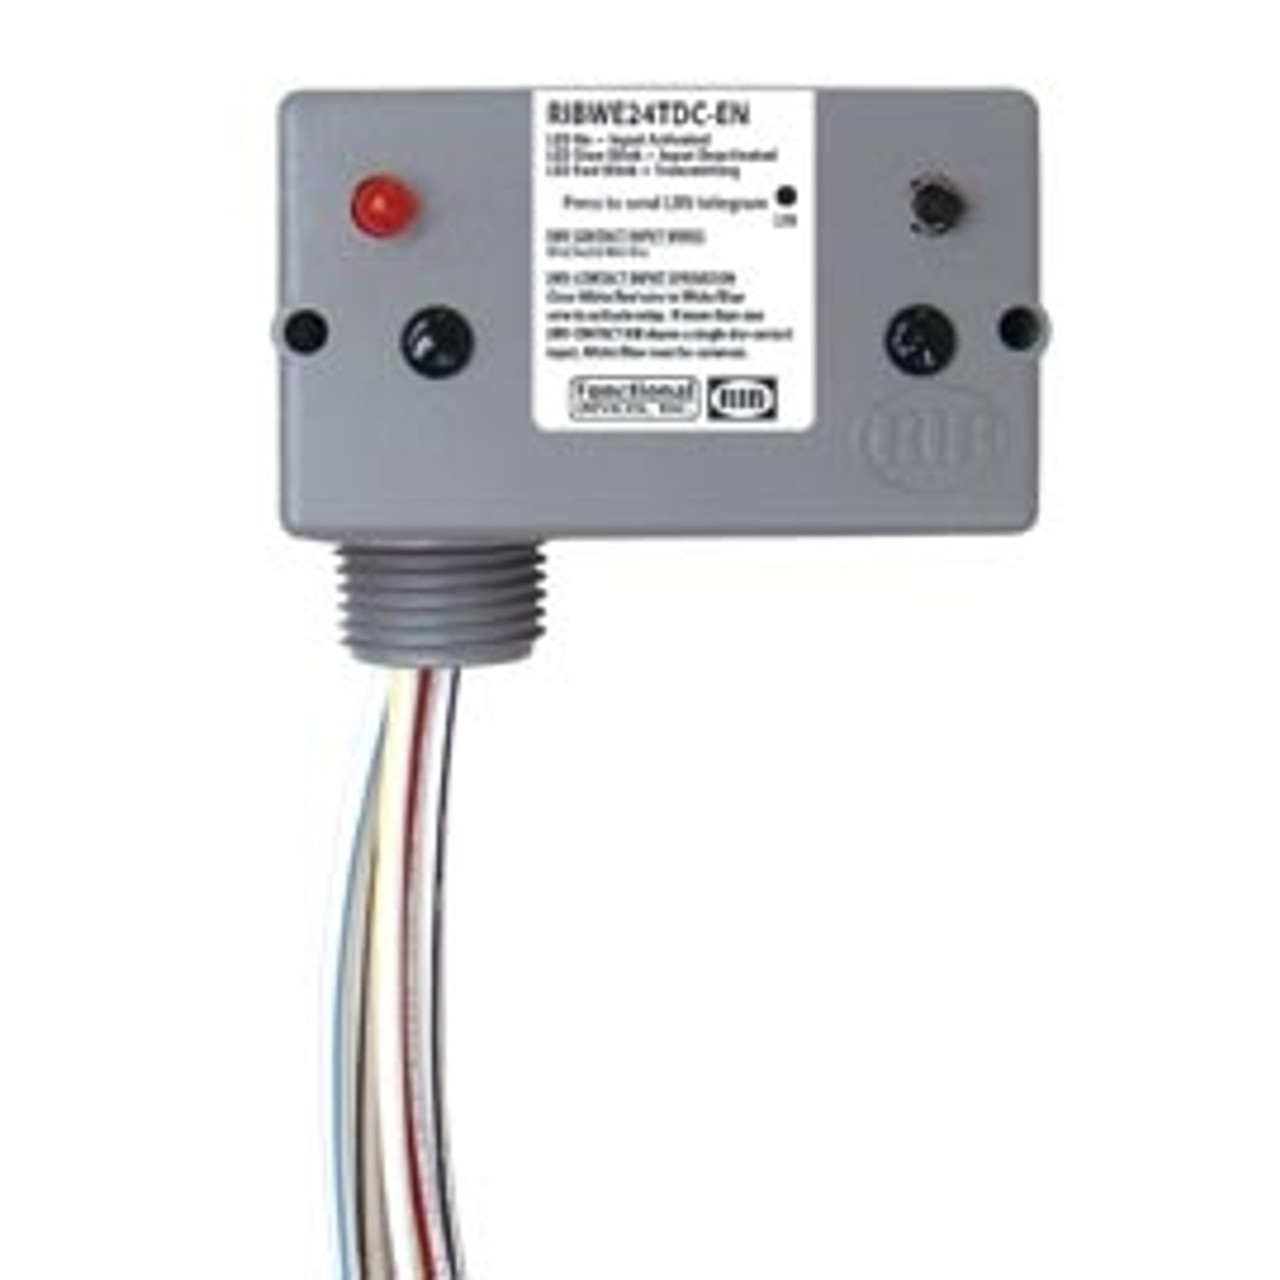 FUNCTIONAL DEVICES FUNRIBWE24TDC-EN EnOcean Enclosed Transmitter 24Vac/dc Power with Opto and Dry Contact Inputs